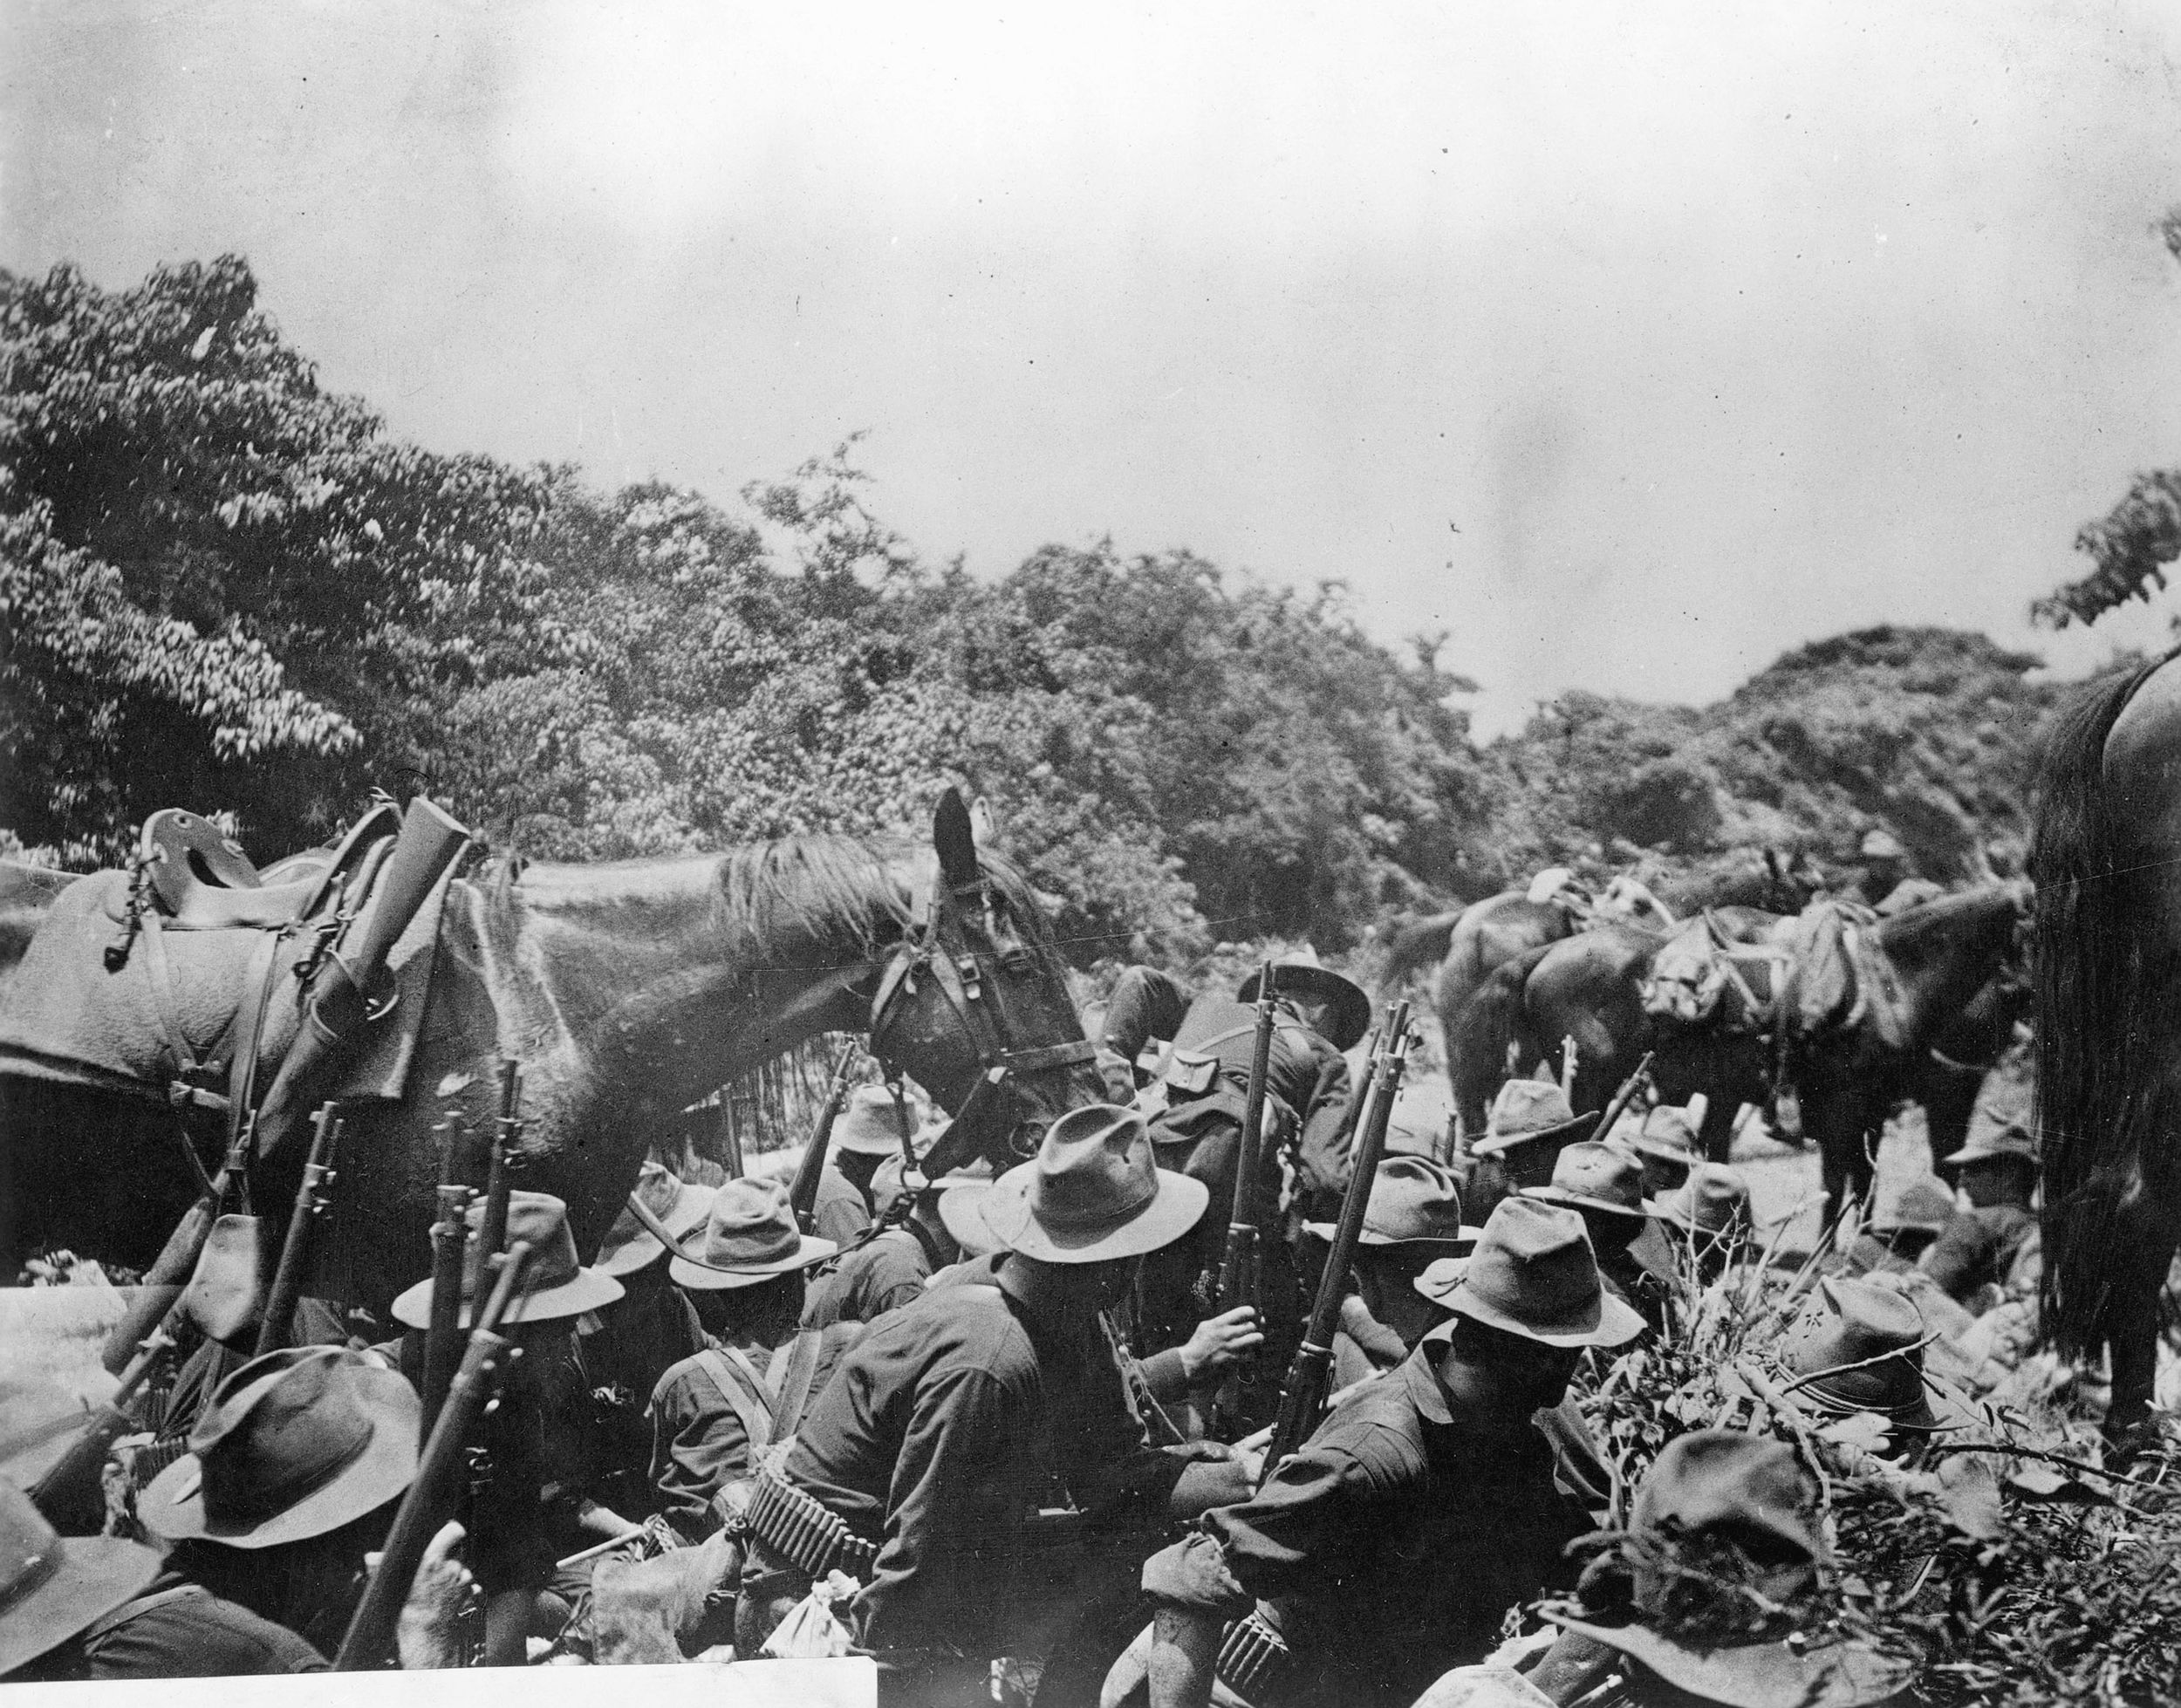 Troops of the 16th Infantry take fire in the perilous San Juan River bottom. Most American casualties were suffered here prior to the charge on Kettle and San Juan Hills.